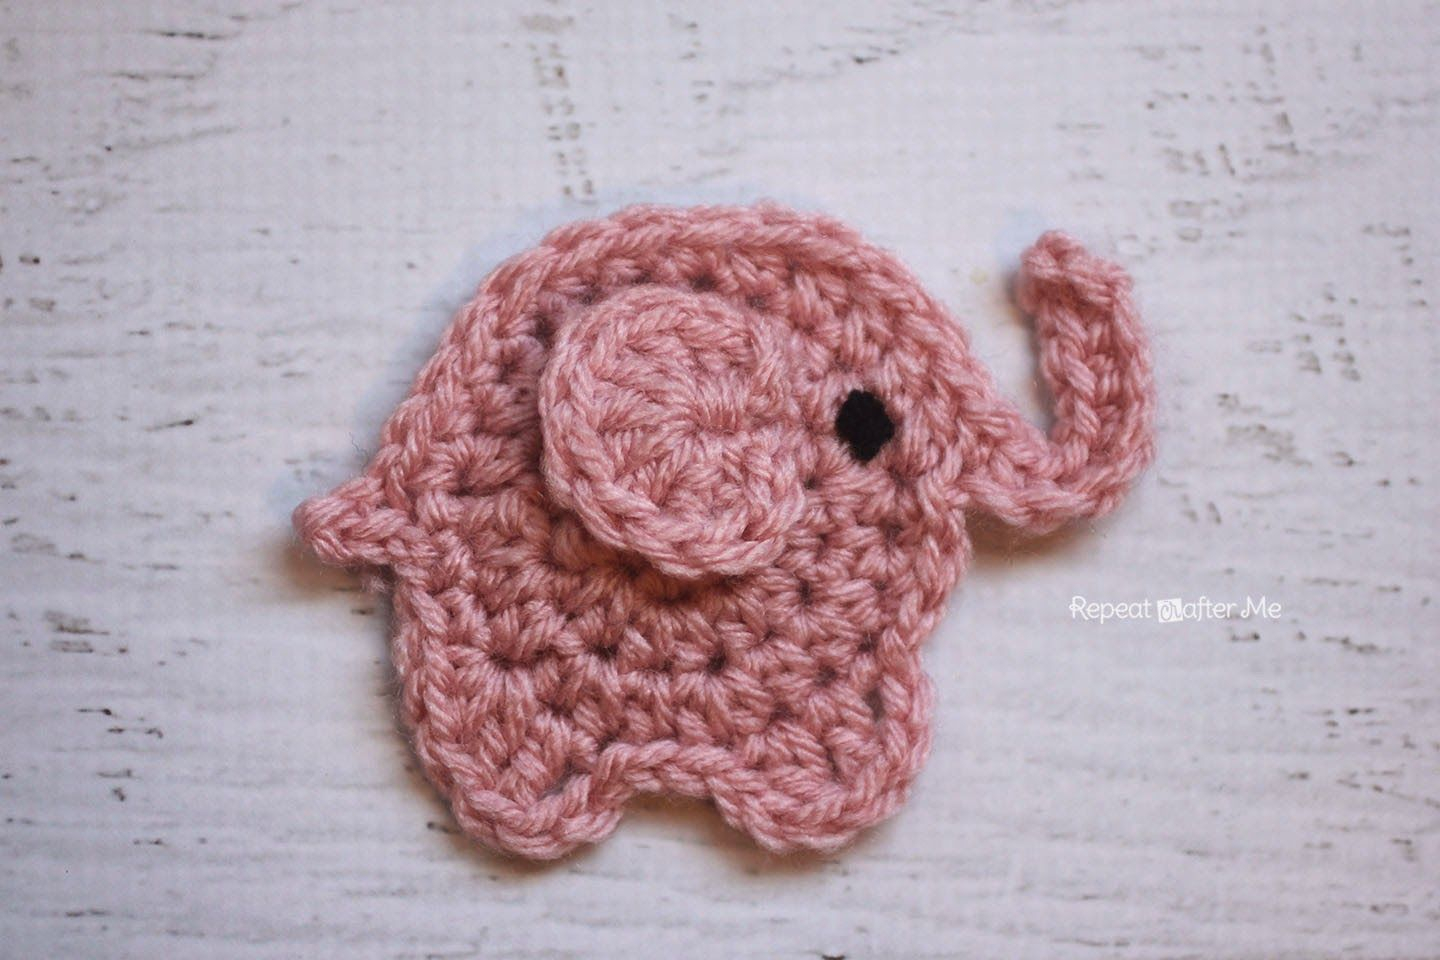 Free Crochet Applique Patterns E Is For Elephant Crochet Elephant Applique Crafts Crochet